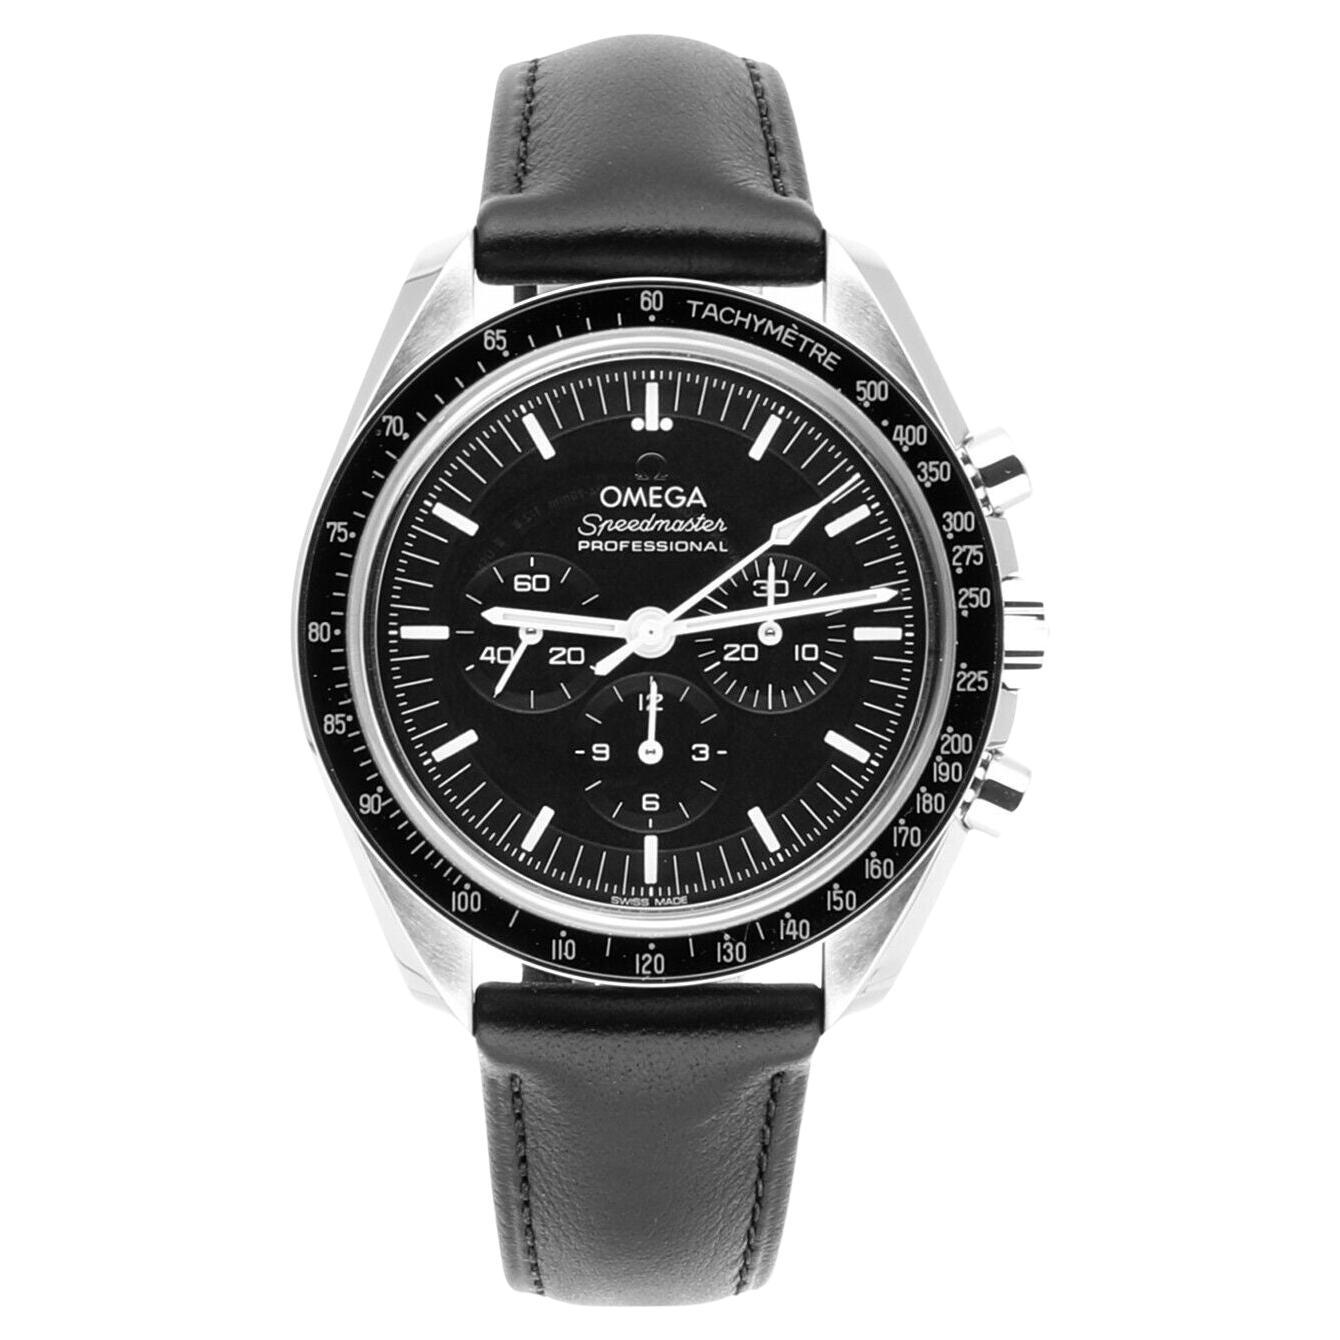 Omega Speedmaster Professional Moonwatch Chronograph Black Dial 31032425001002 For Sale